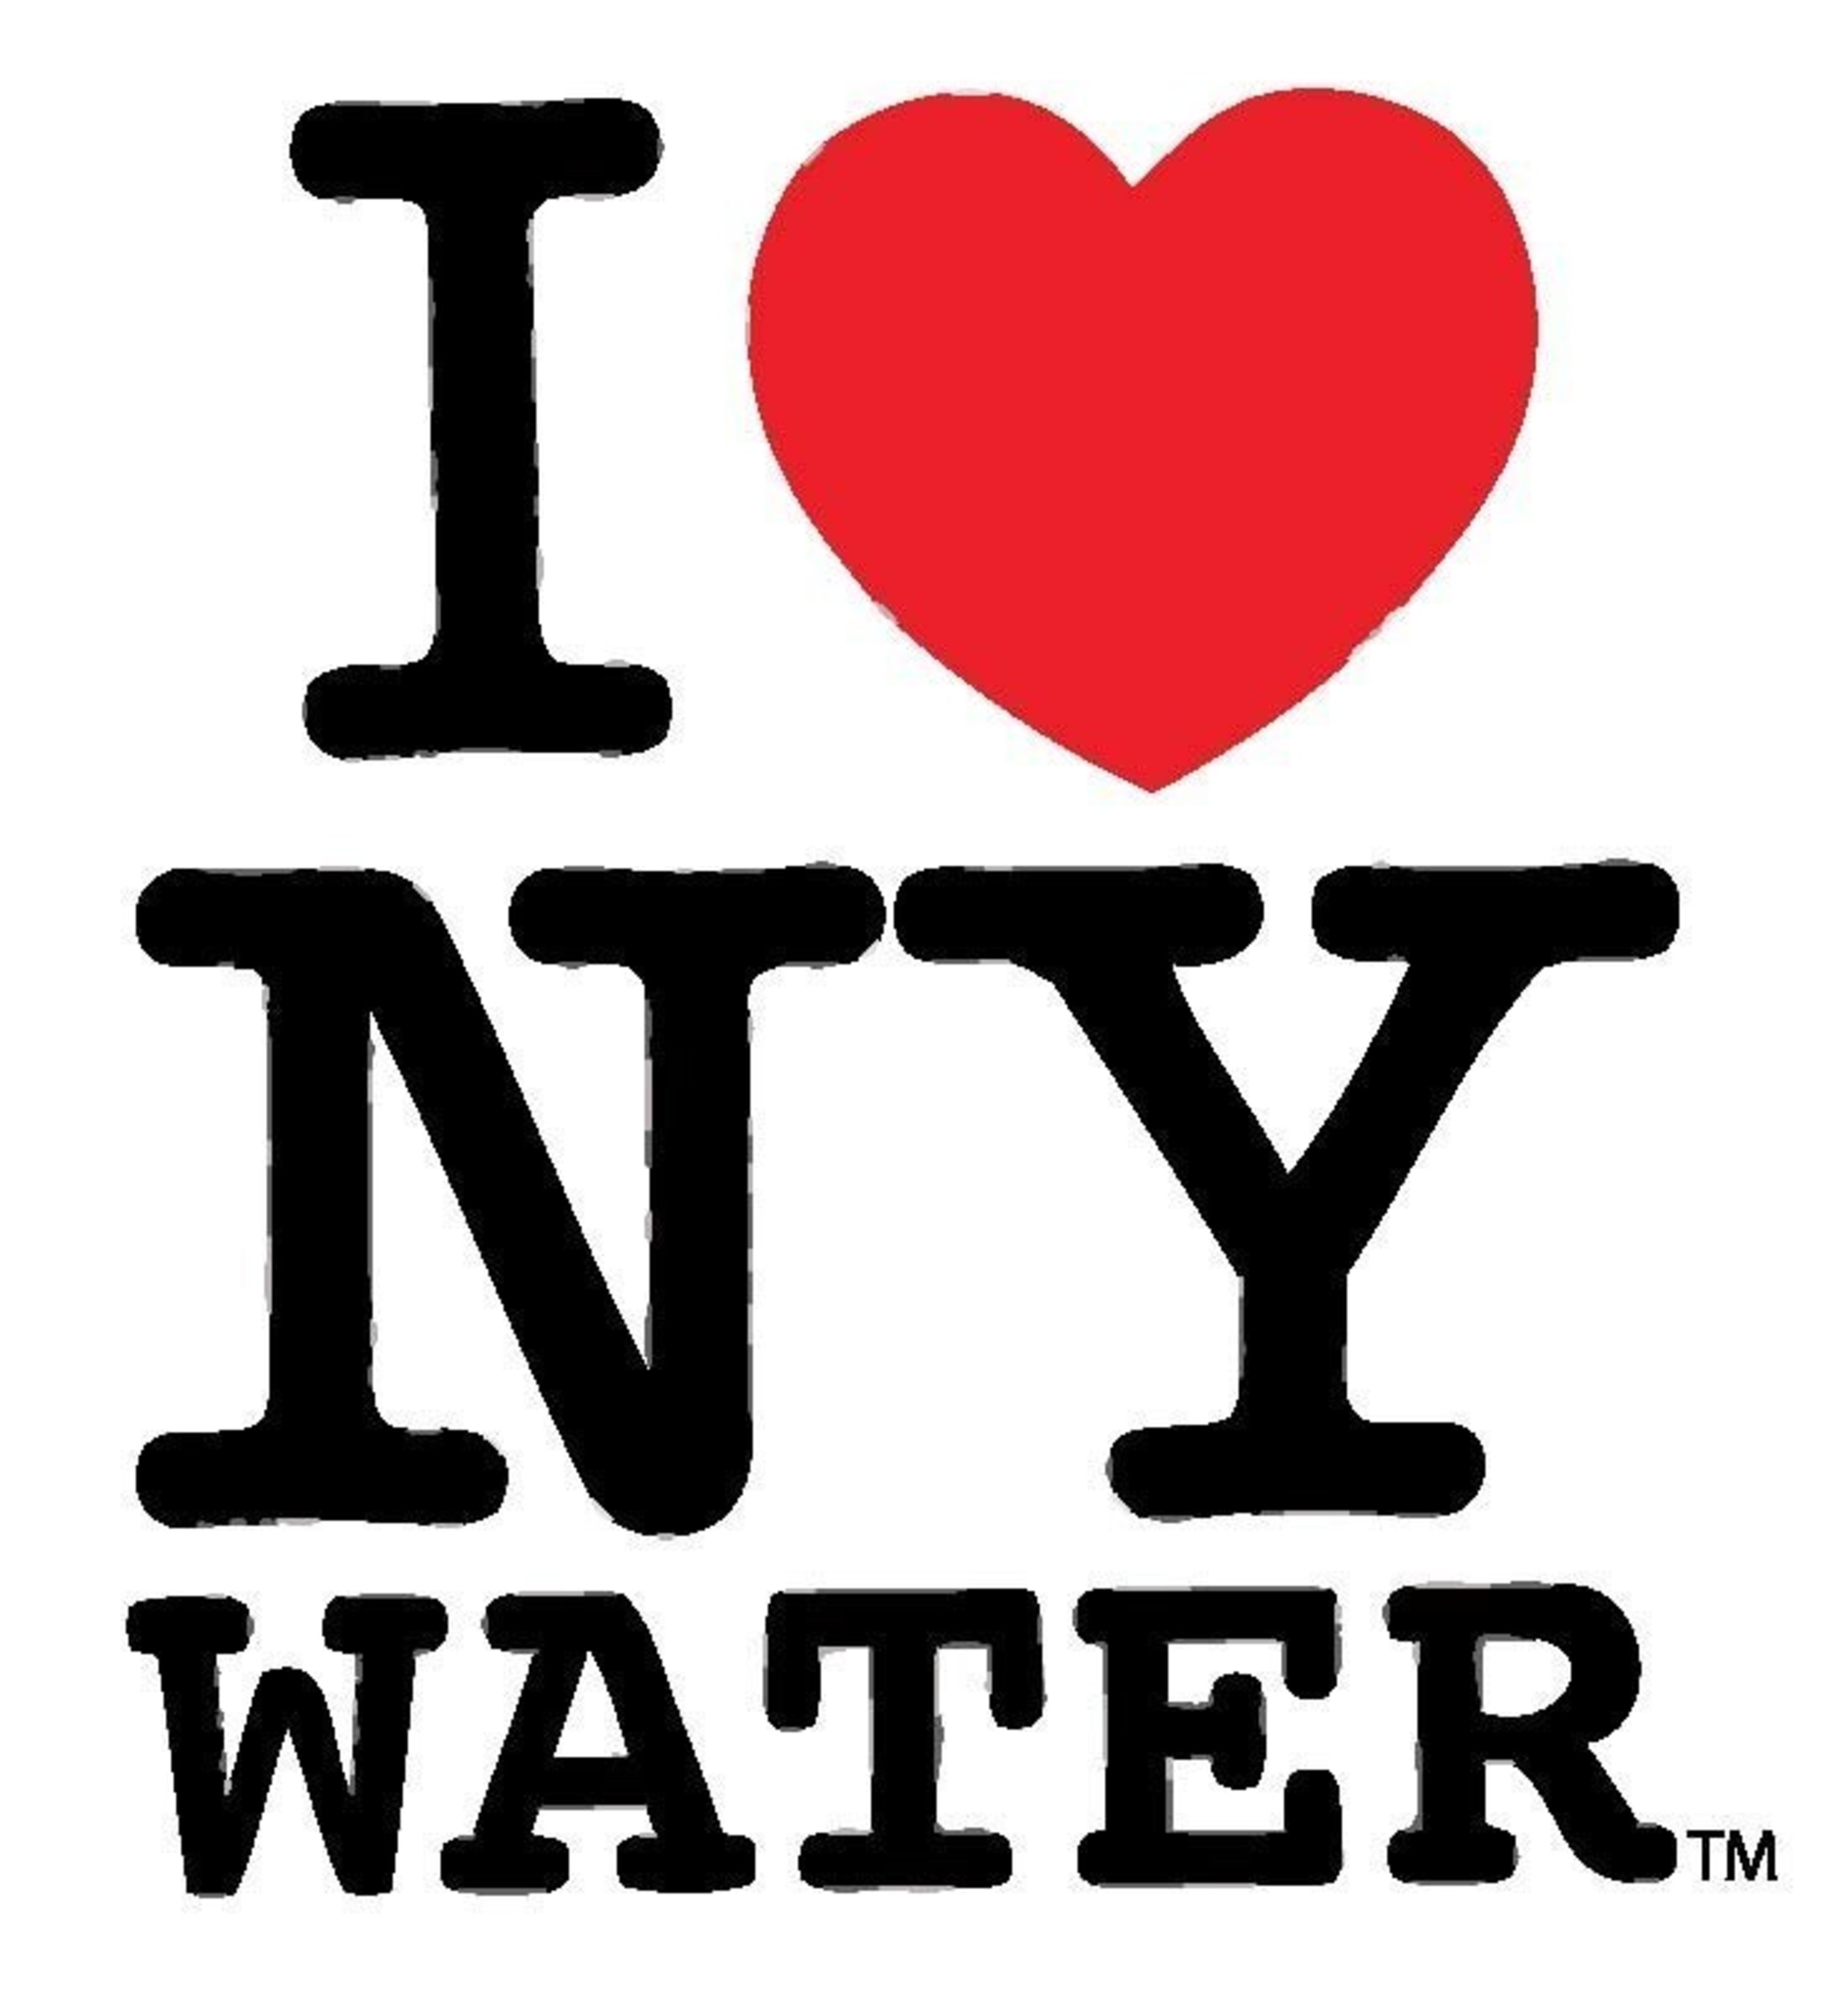 I Love NY Water's mission is to encourage people to choose New York's tap water using a refillable water bottle every day. The initiative promotes the advantages of our state's water including its quality standards, health benefits, low cost and delicious taste. I Love New York Water has the official use of the world-renowned I "Heart" NY logo to help bring awareness of this important initiative.